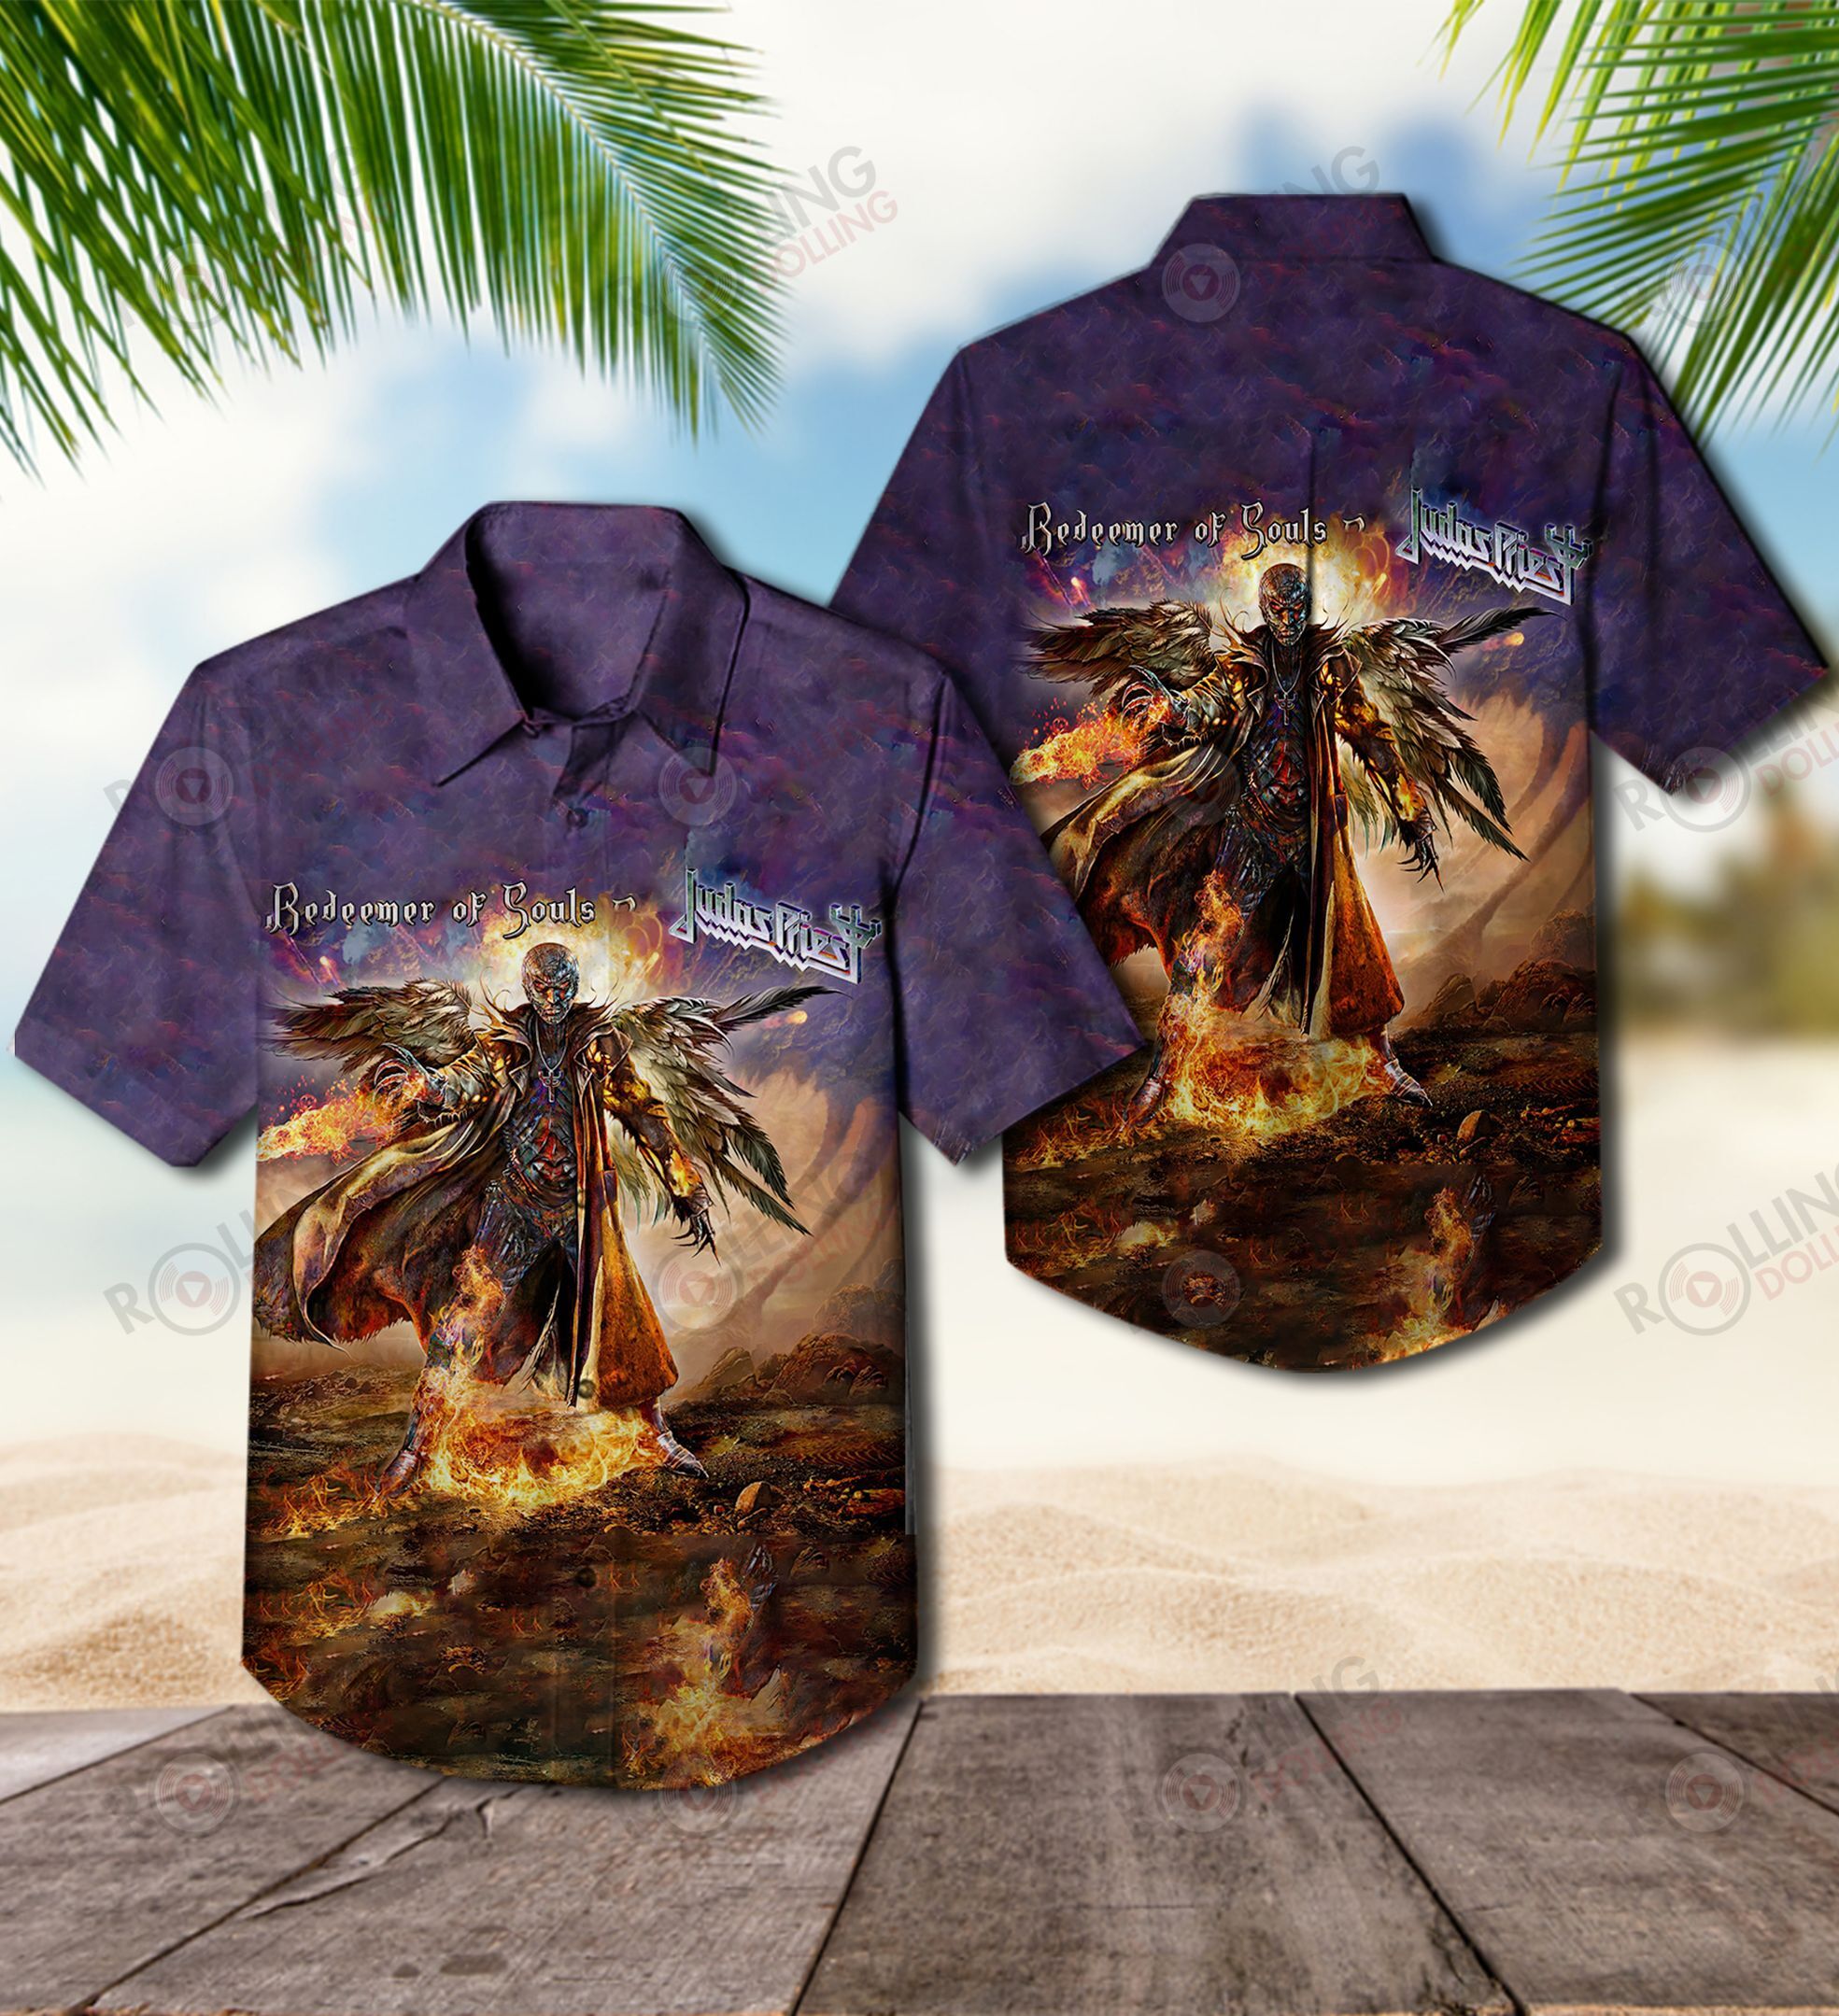 We have compiled a list of some of the best Hawaiian shirt that are available 221